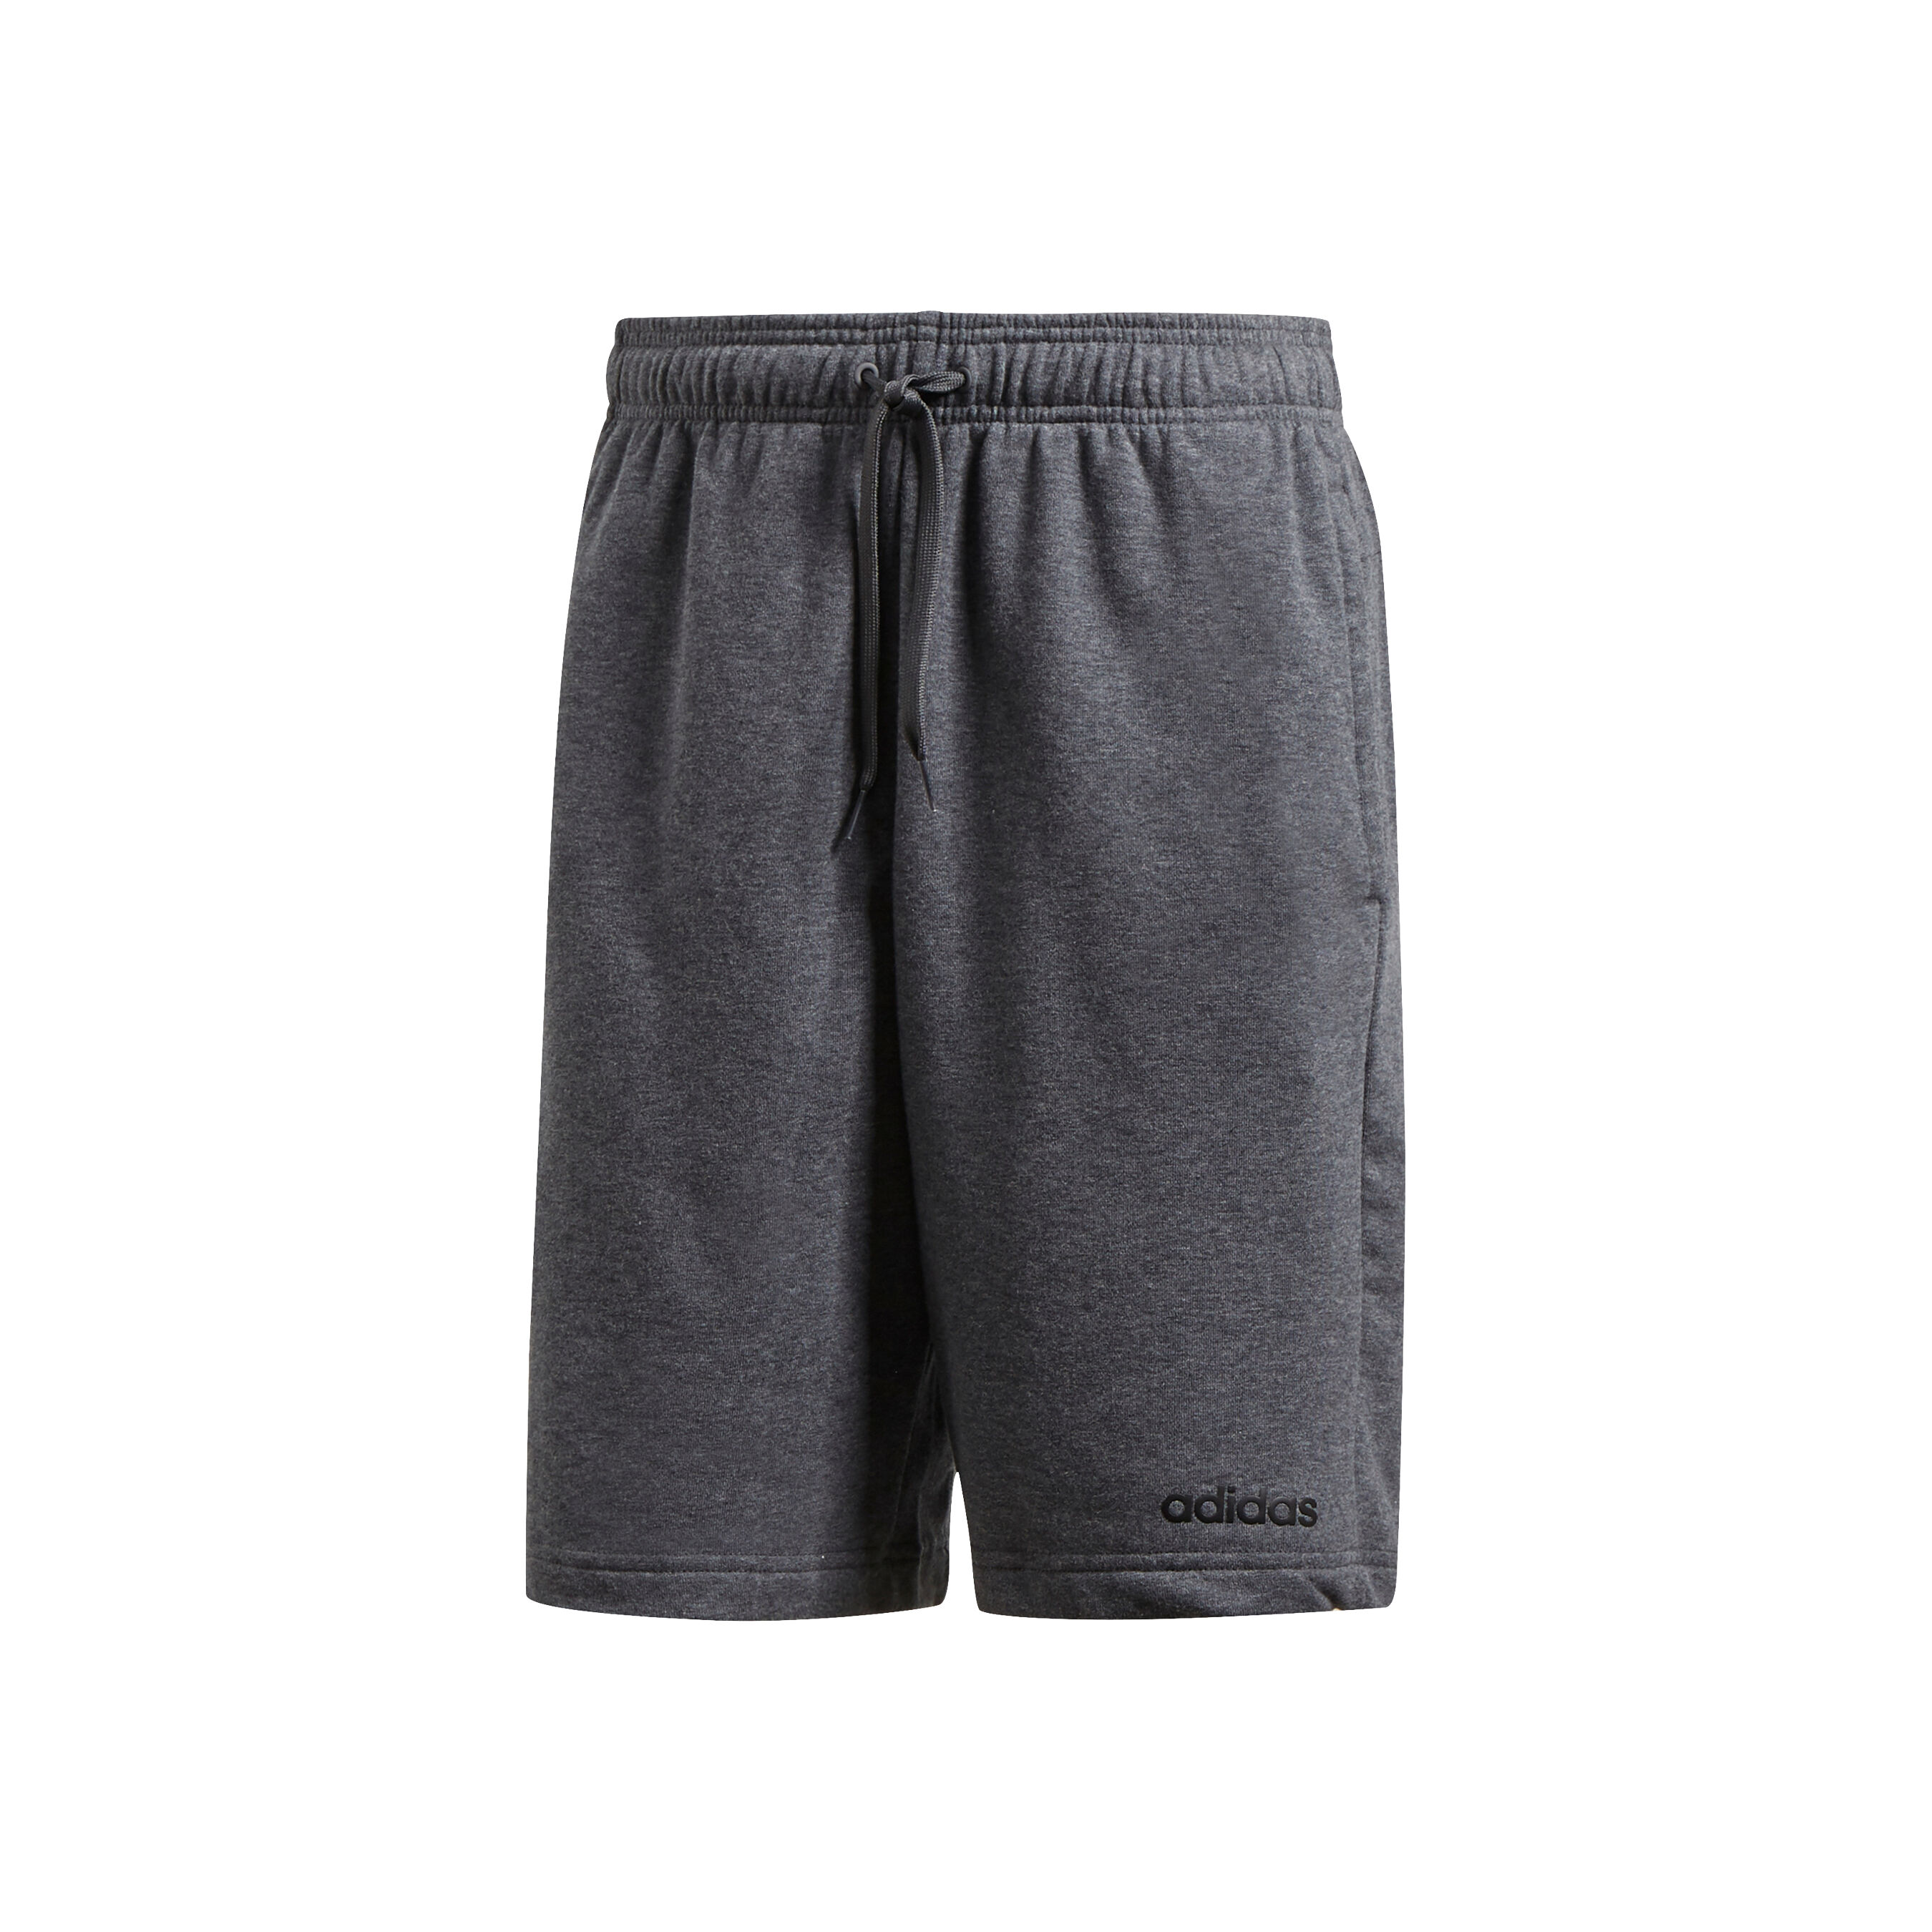 adidas french terry shorts mens